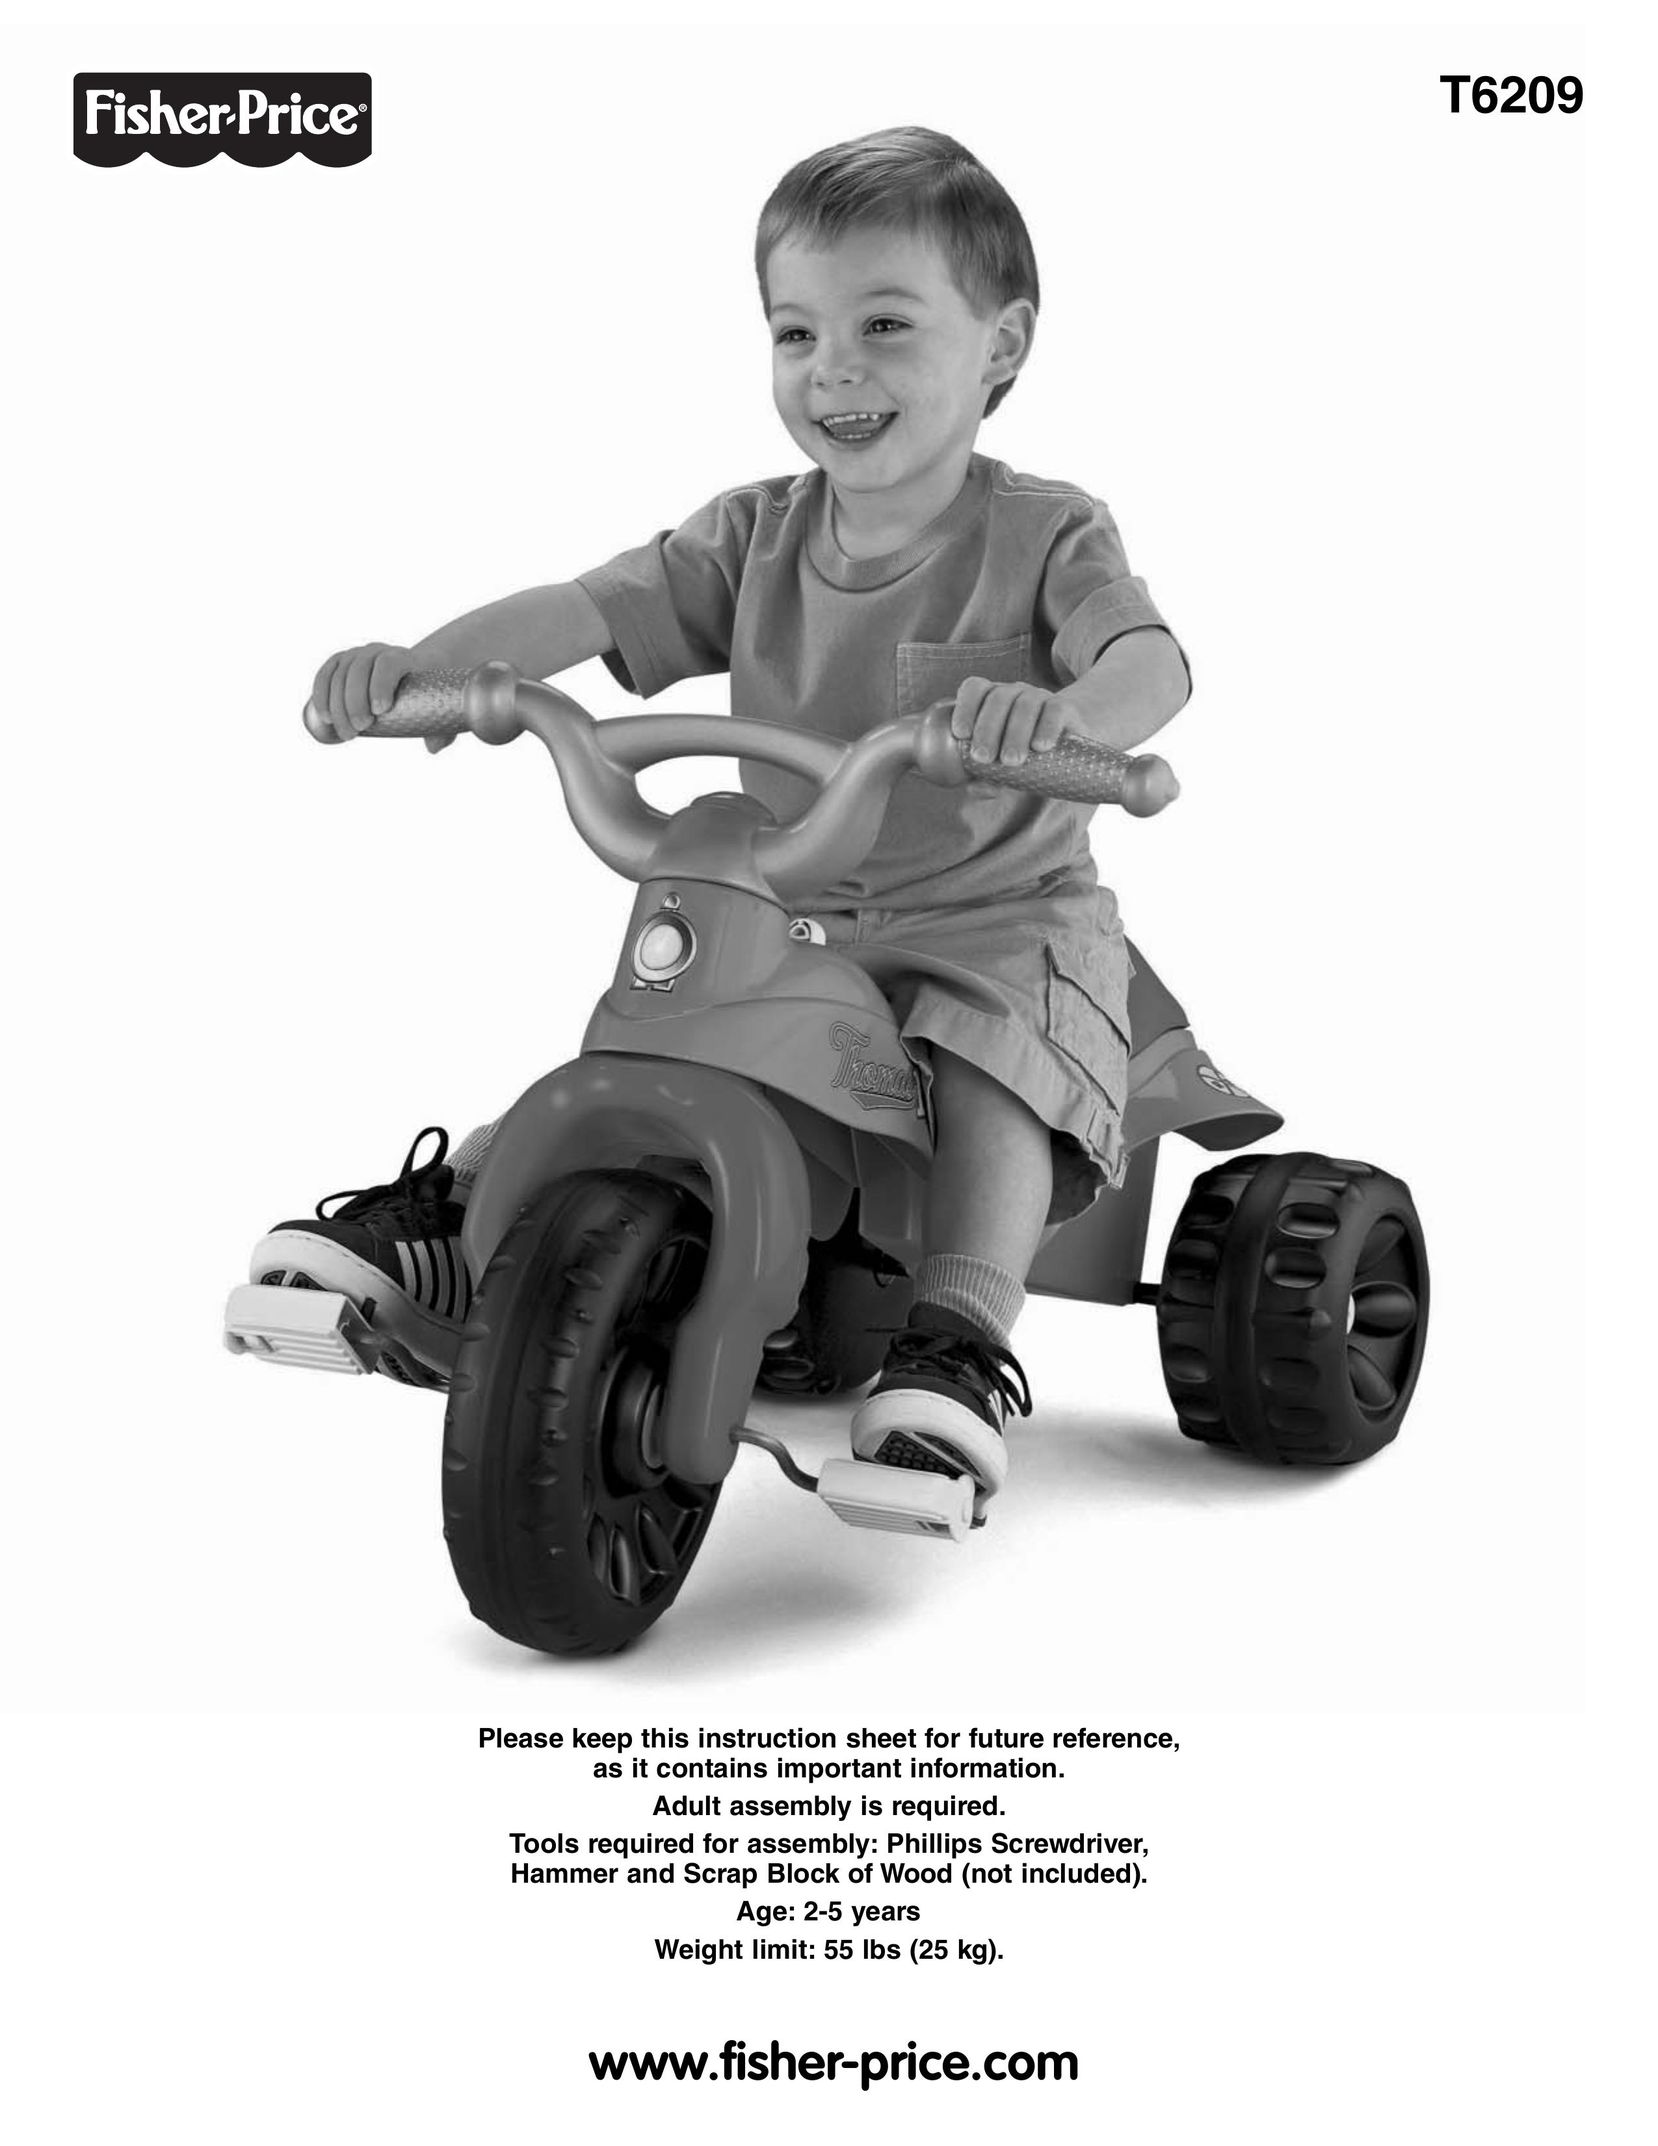 Fisher-Price T6209 Bicycle User Manual